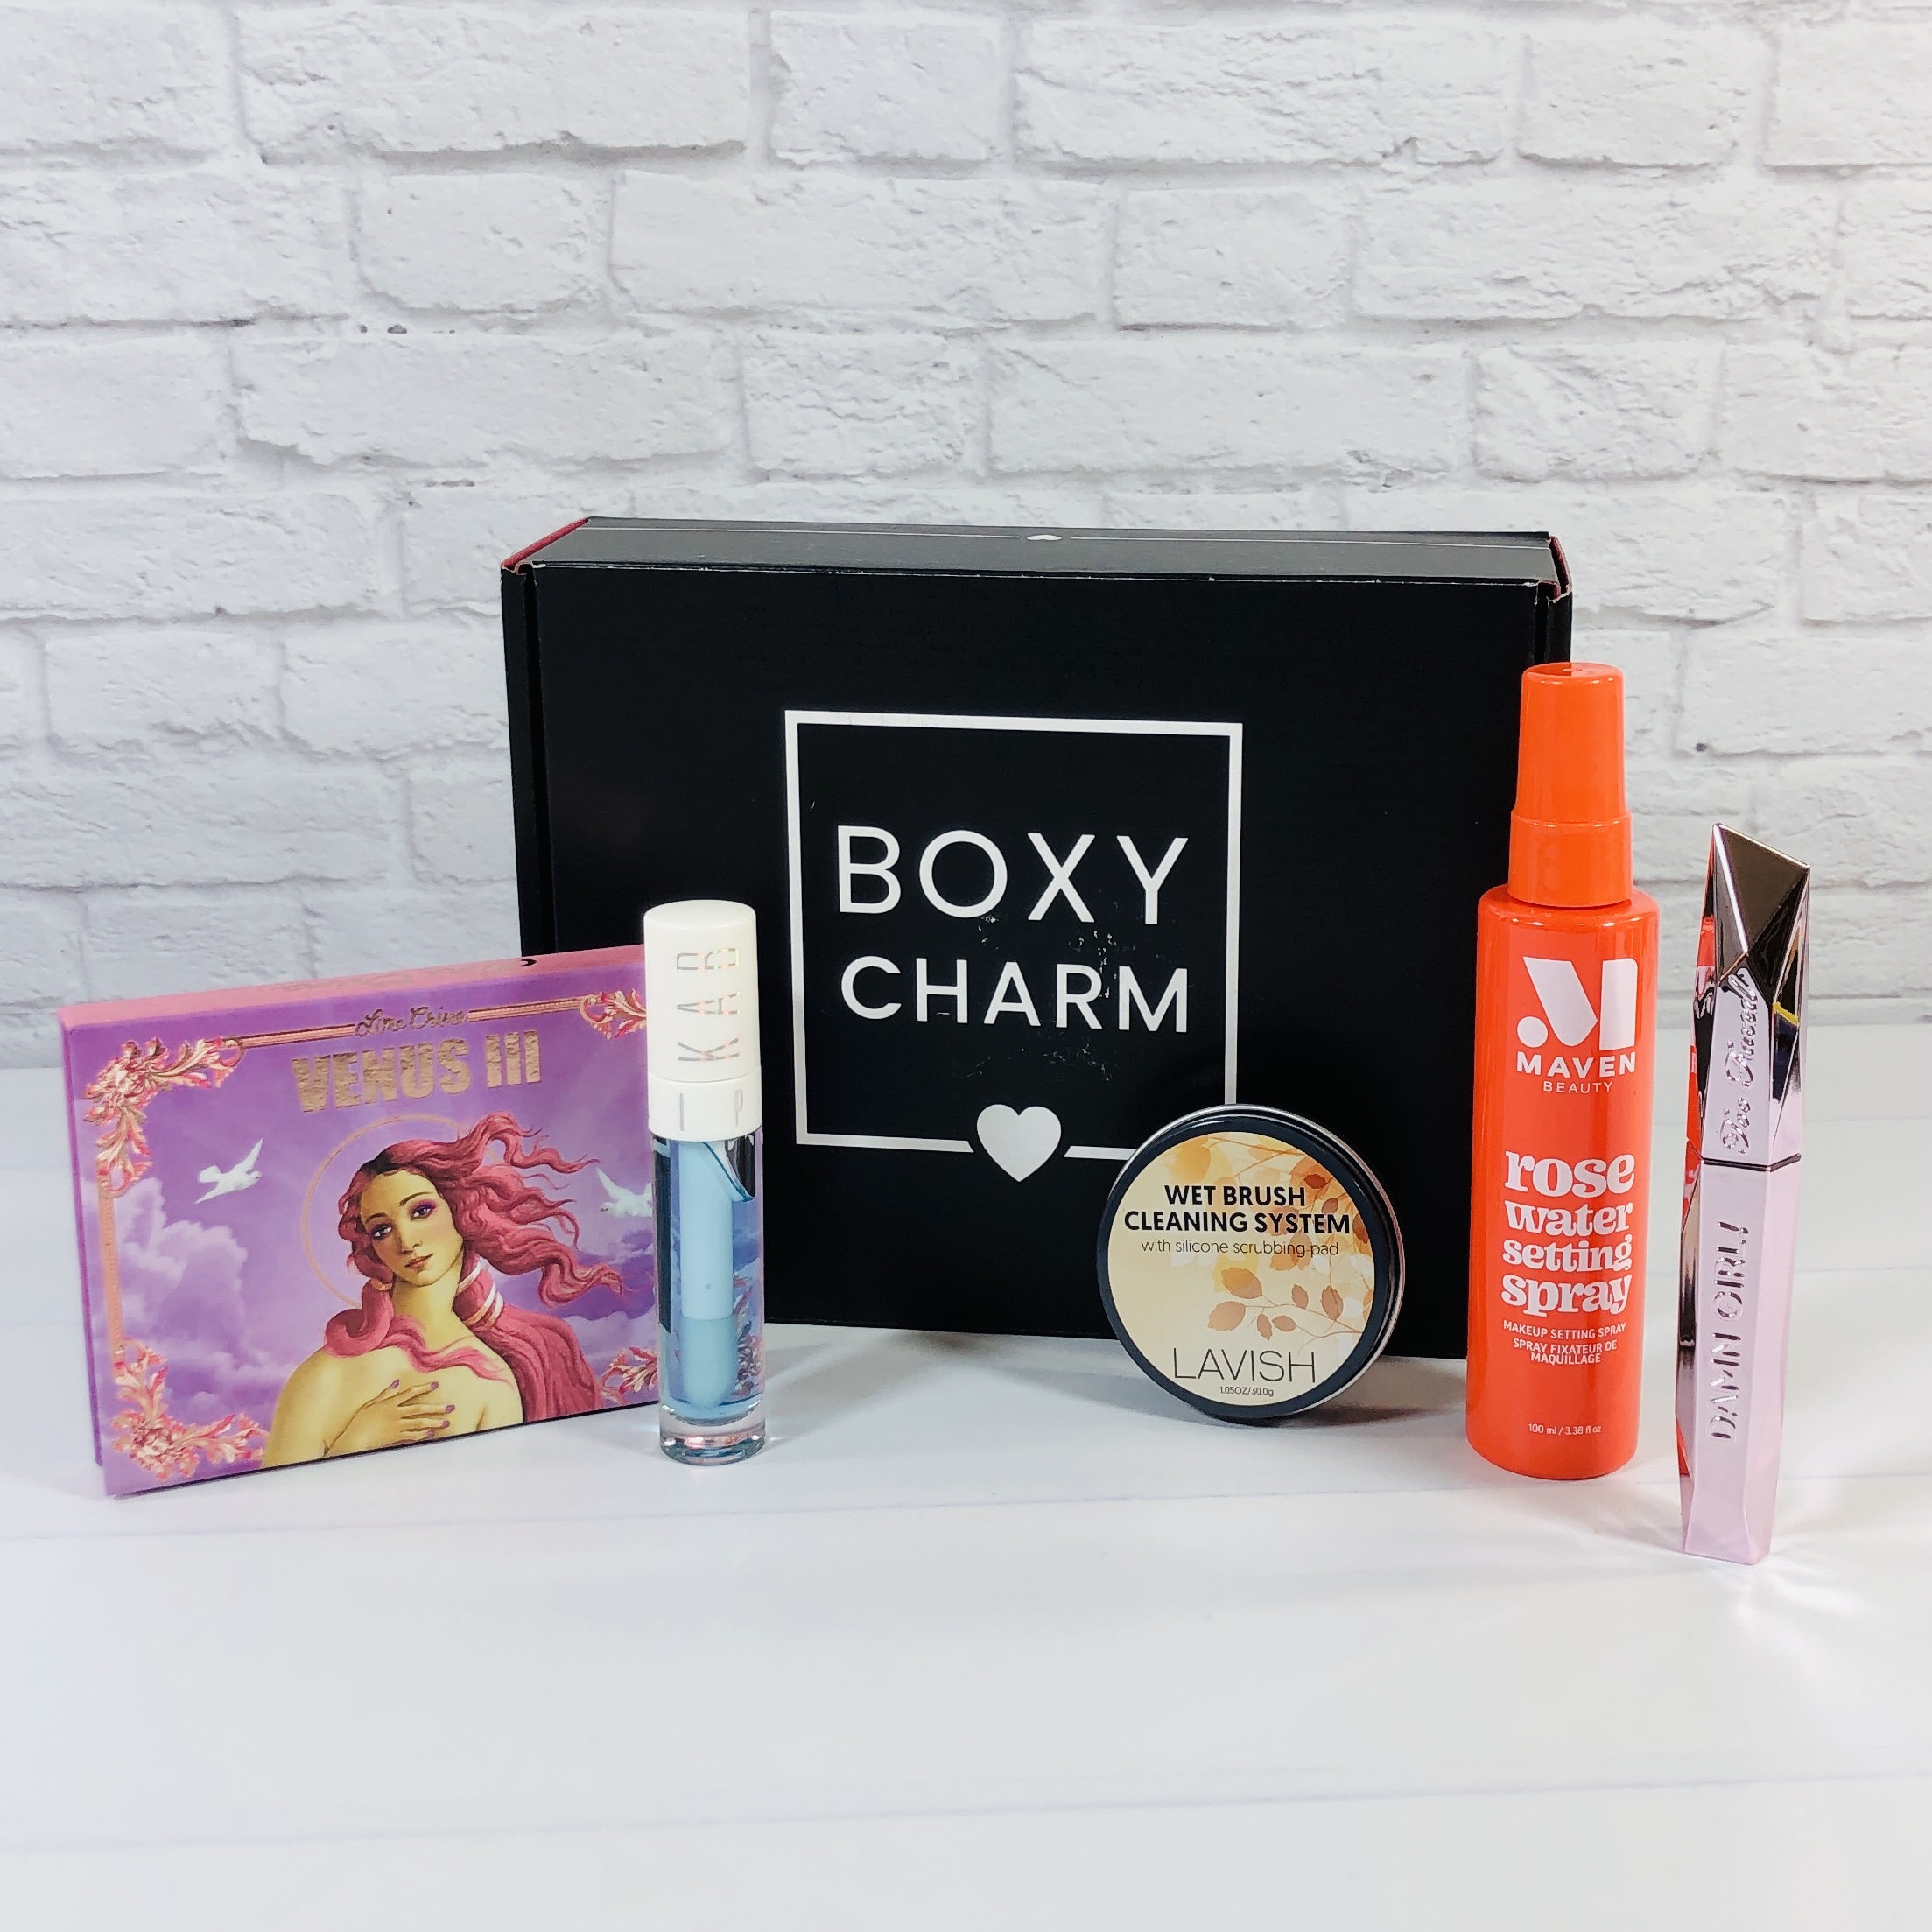 BOXYCHARM Reviews Get All The Details At Hello Subscription!